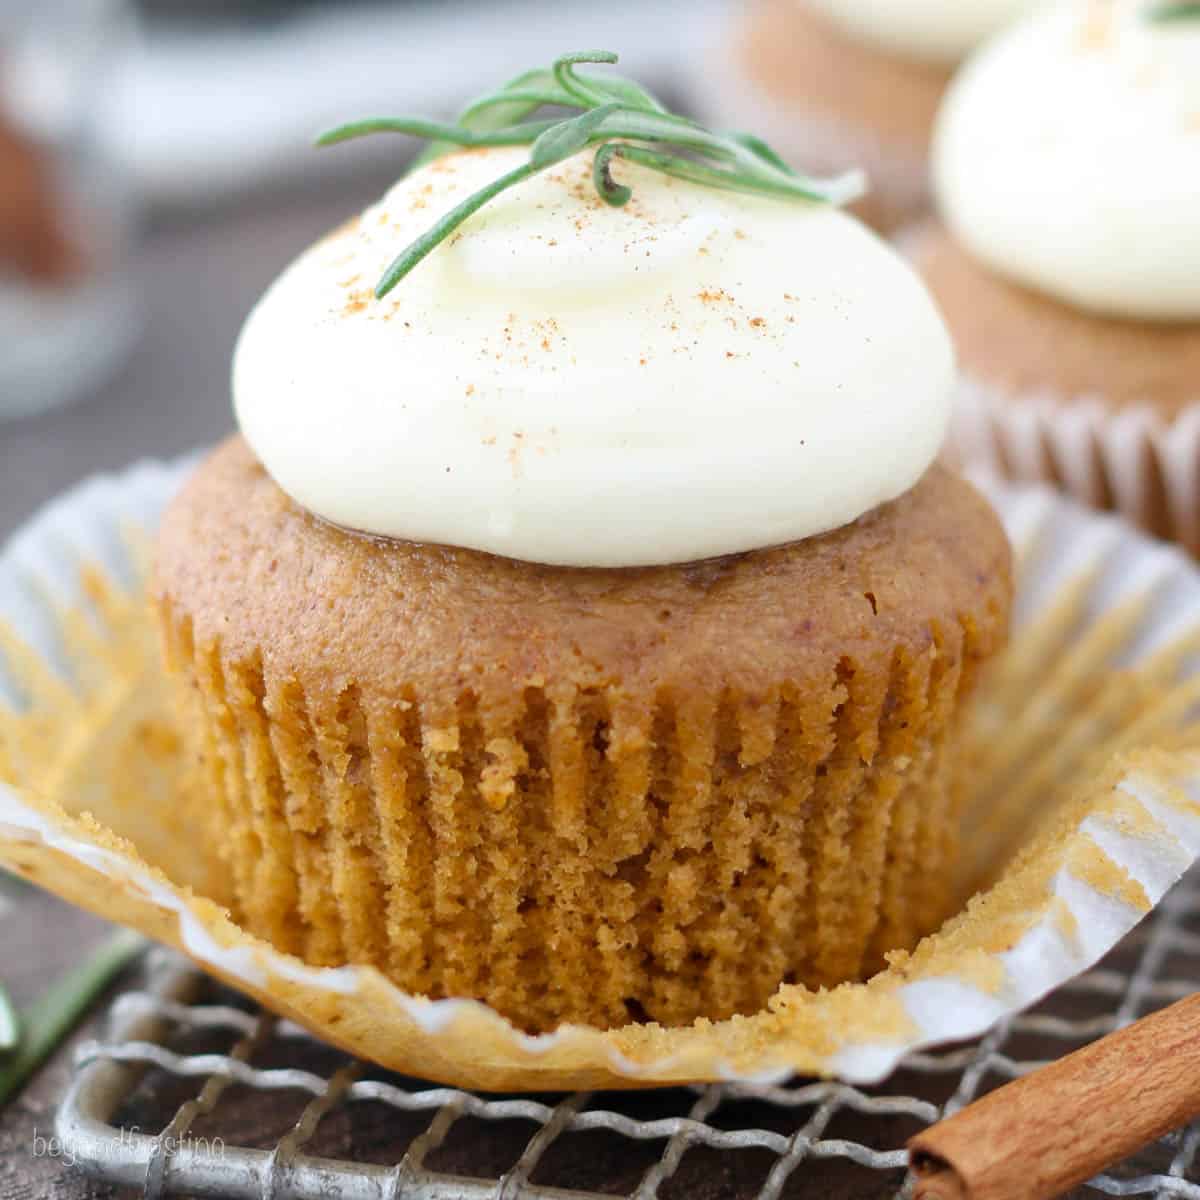 https://beyondfrosting.com/wp-content/uploads/2018/12/Gingerbread-Cupcakes-011-2.jpg